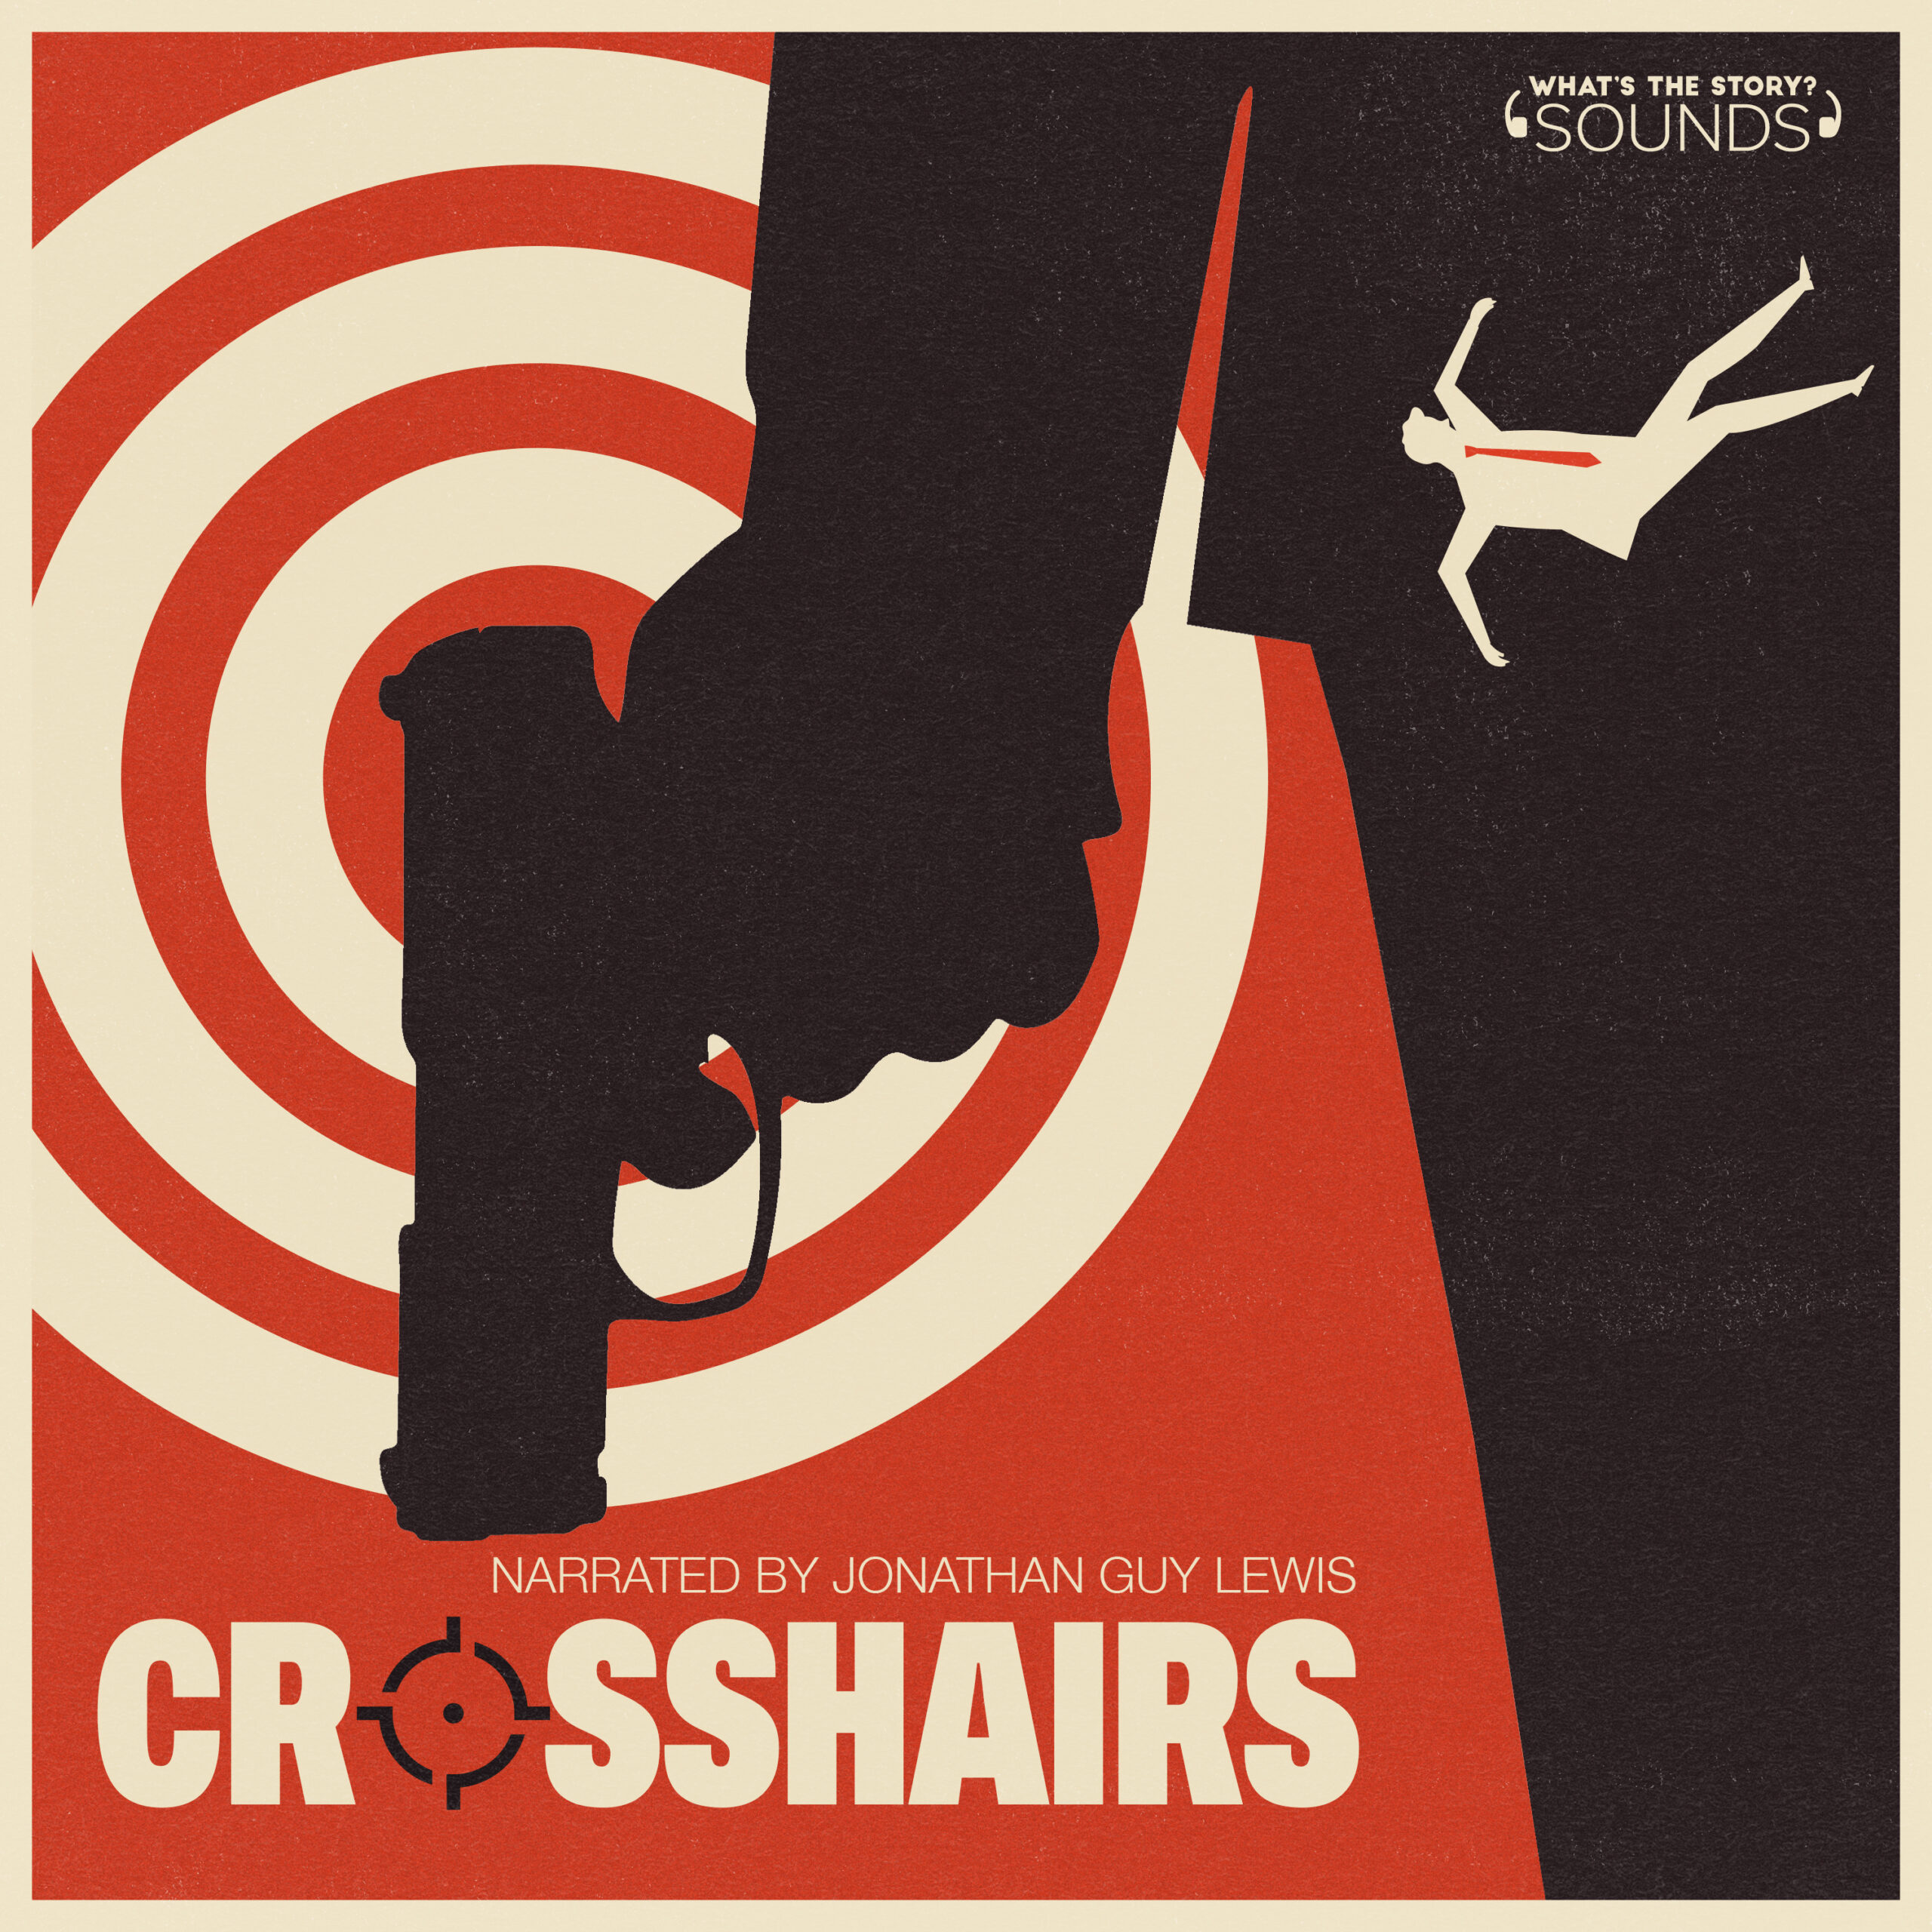 CrossHairs FINAL Apple Thumbnail 3000x3000 scaled